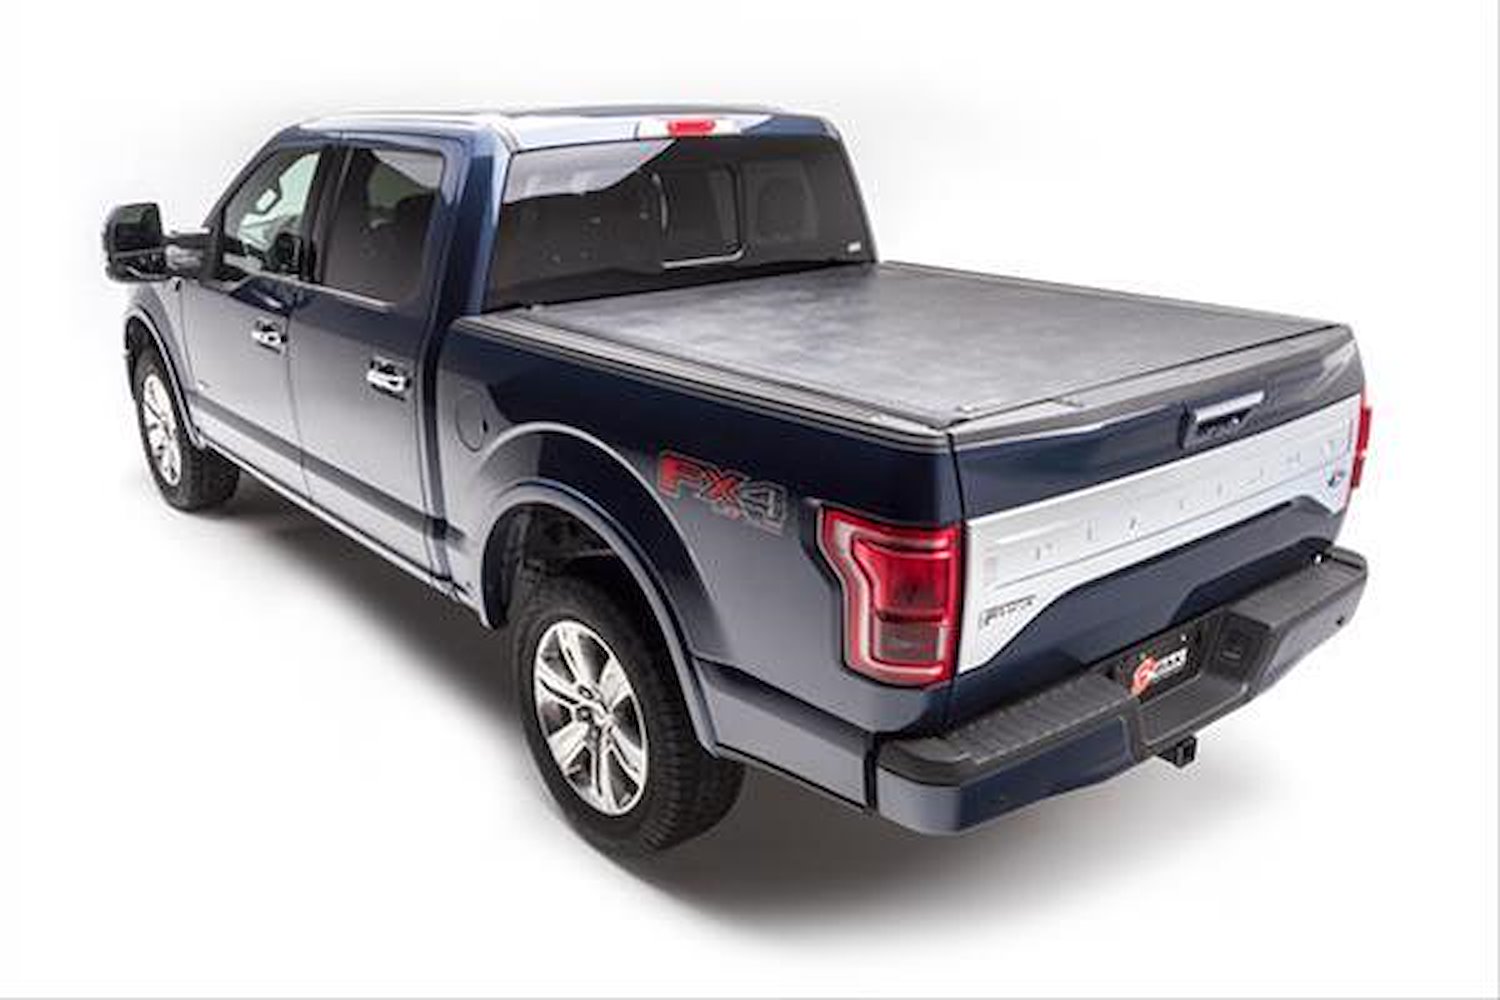 Revolver X2 Roll-Up Tonneau Cover 2016-2018 for Nissan